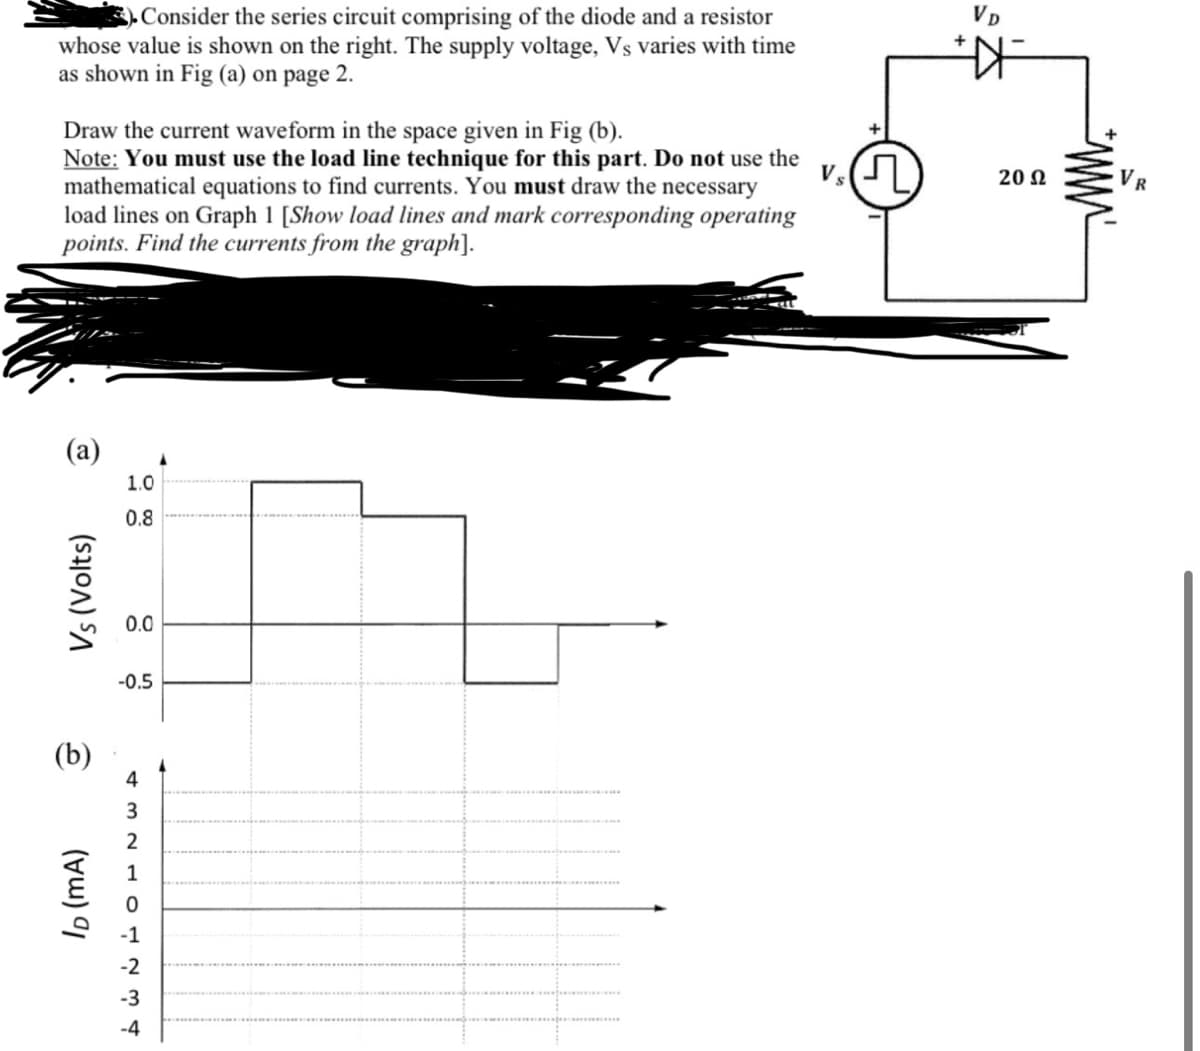 ). Consider the series circuit comprising of the diode and a resistor
whose value is shown on the right. The supply voltage, Vs varies with time
as shown in Fig (a) on page 2.
Draw the current waveform in the space given in Fig (b).
Note: You must use the load line technique for this part. Do not use the
mathematical equations to find currents. You must draw the necessary
load lines on Graph 1 [Show load lines and mark corresponding operating
points. Find the currents from the graph].
(a)
Vs (Volts)
(b)
ID (mA)
1.0
0.8
0.0
-0.5
43214
0
-1
-2
-3
-4
Vs
(n
VD
*
20 Ω
VR